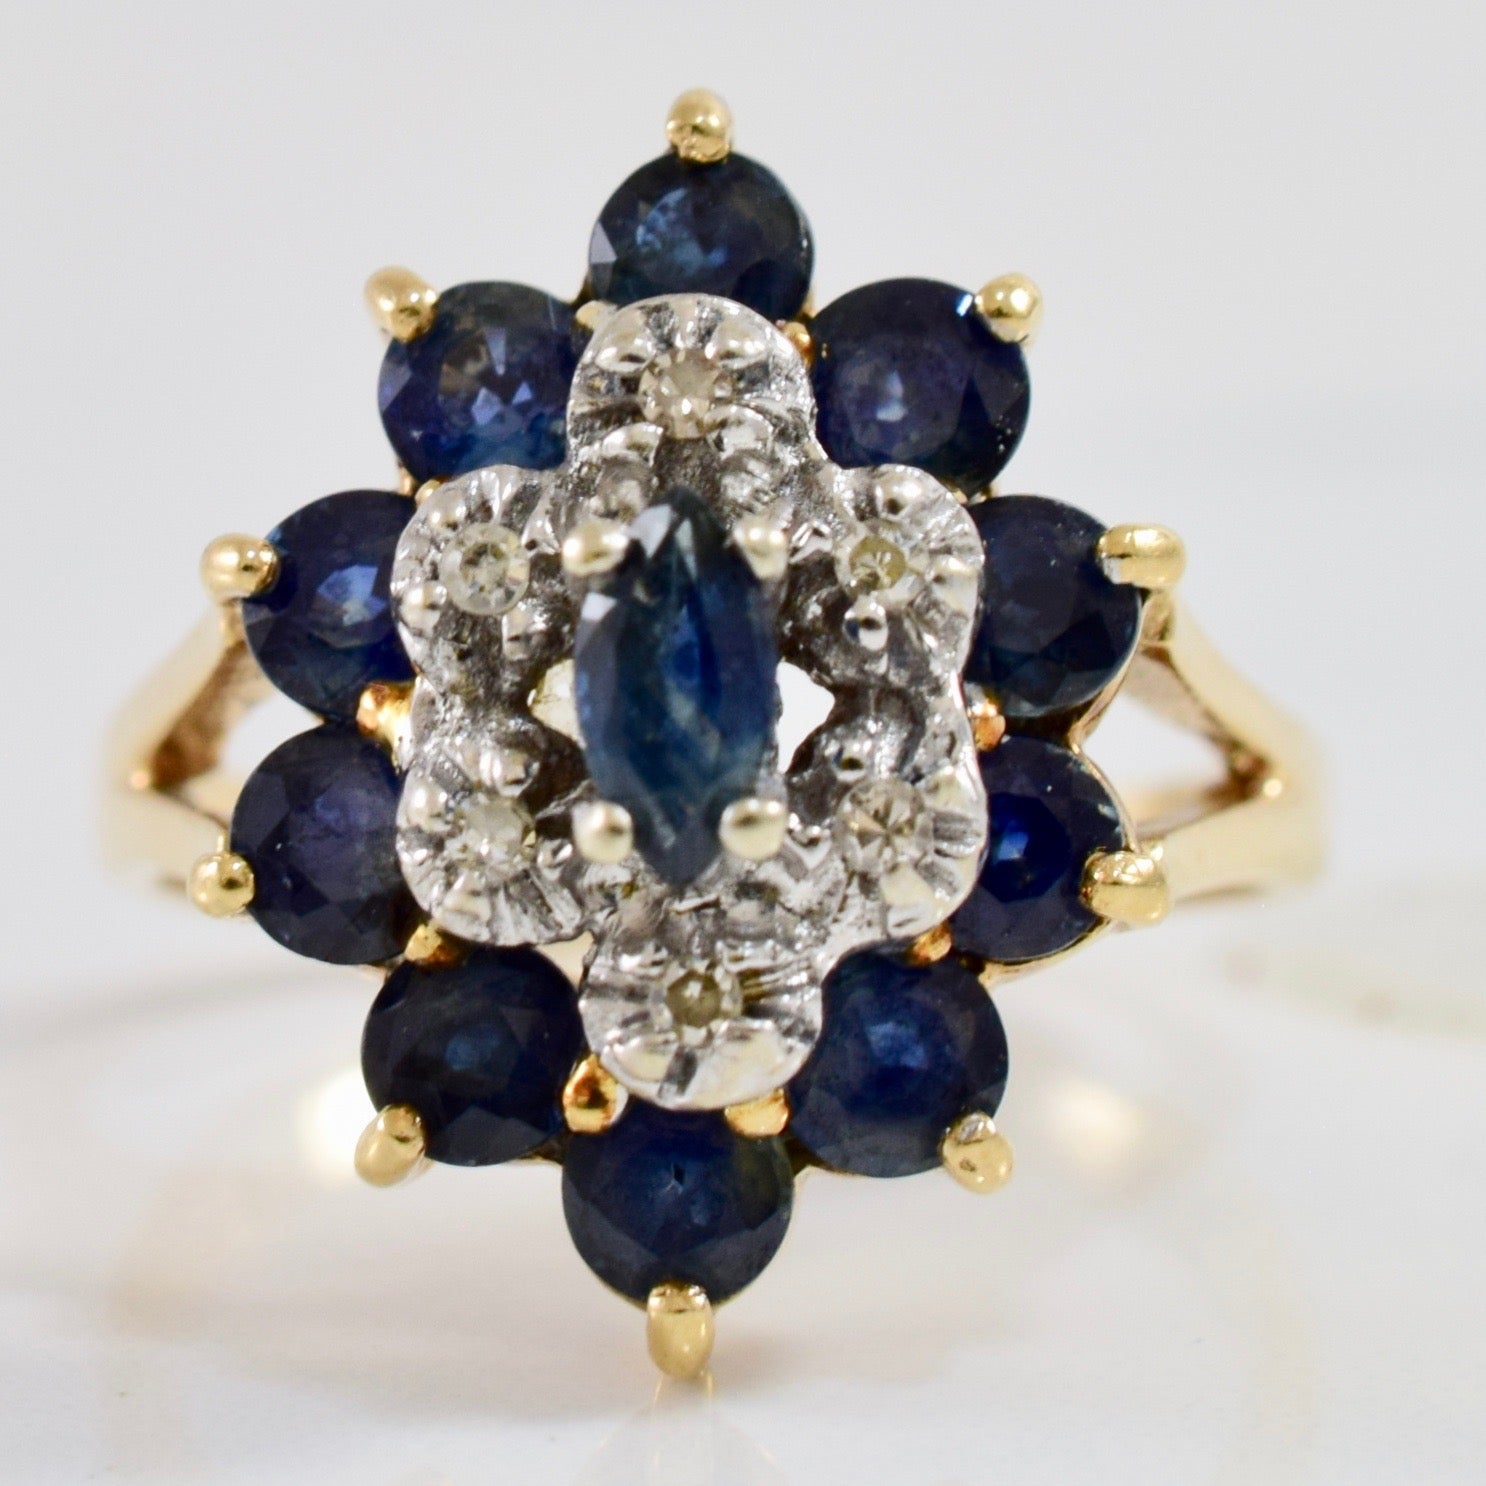 Diamond and Sapphire Cluster Ring | 0.05 ctw SZ 7.5 |